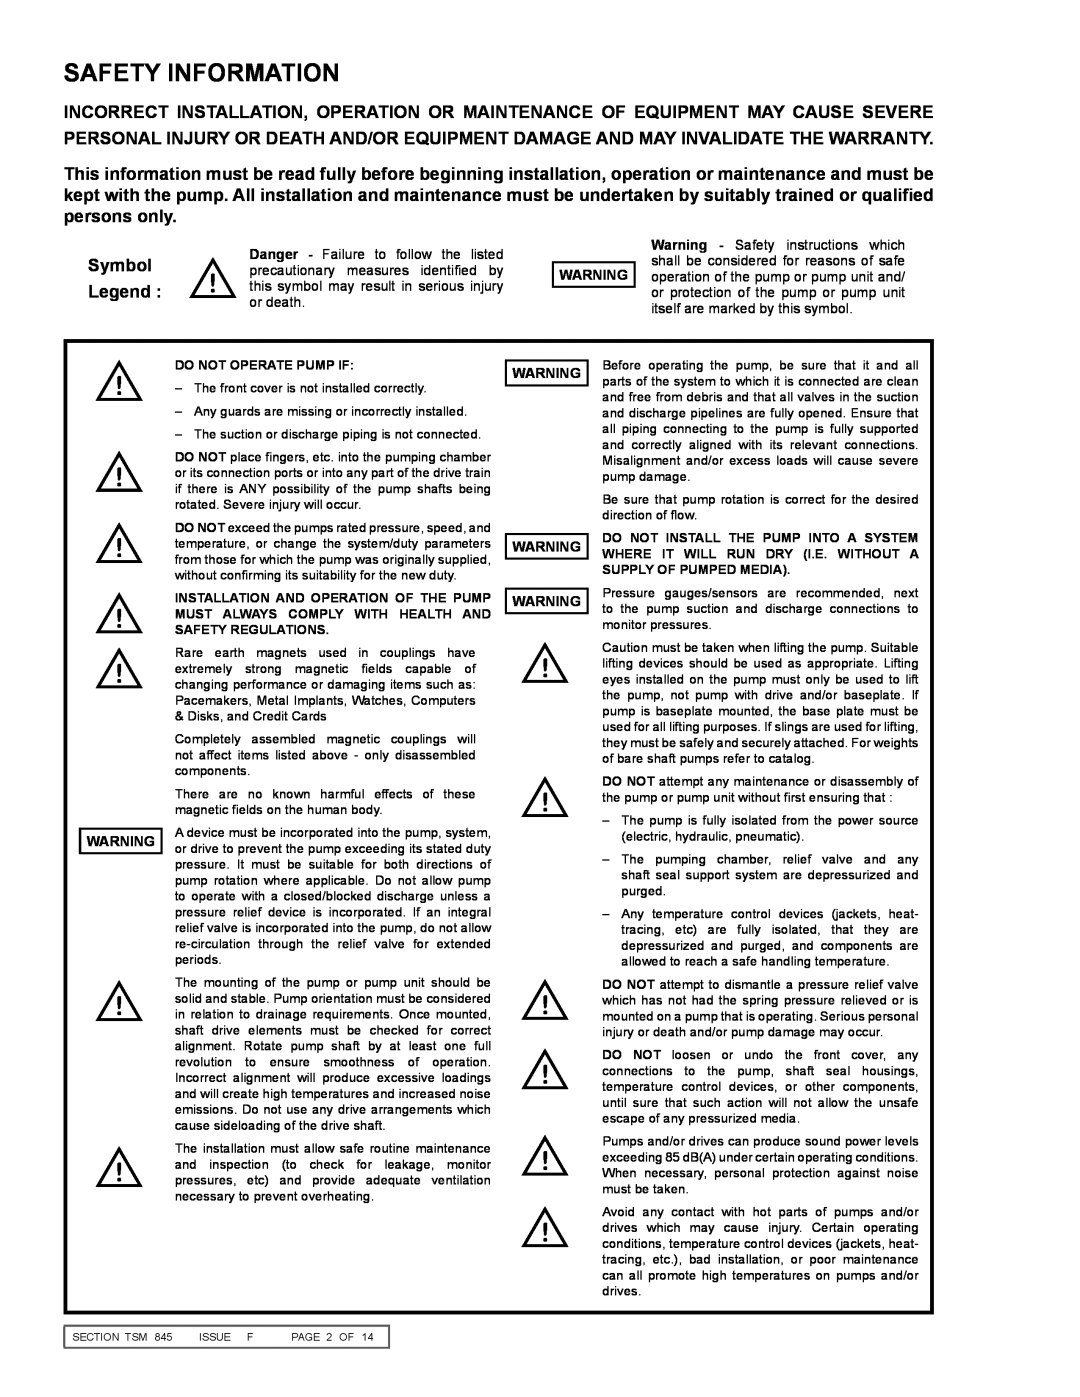 Viking K-825 Safety Information, Symbol, Danger - Failure to follow the listed, precautionary measures identified by 